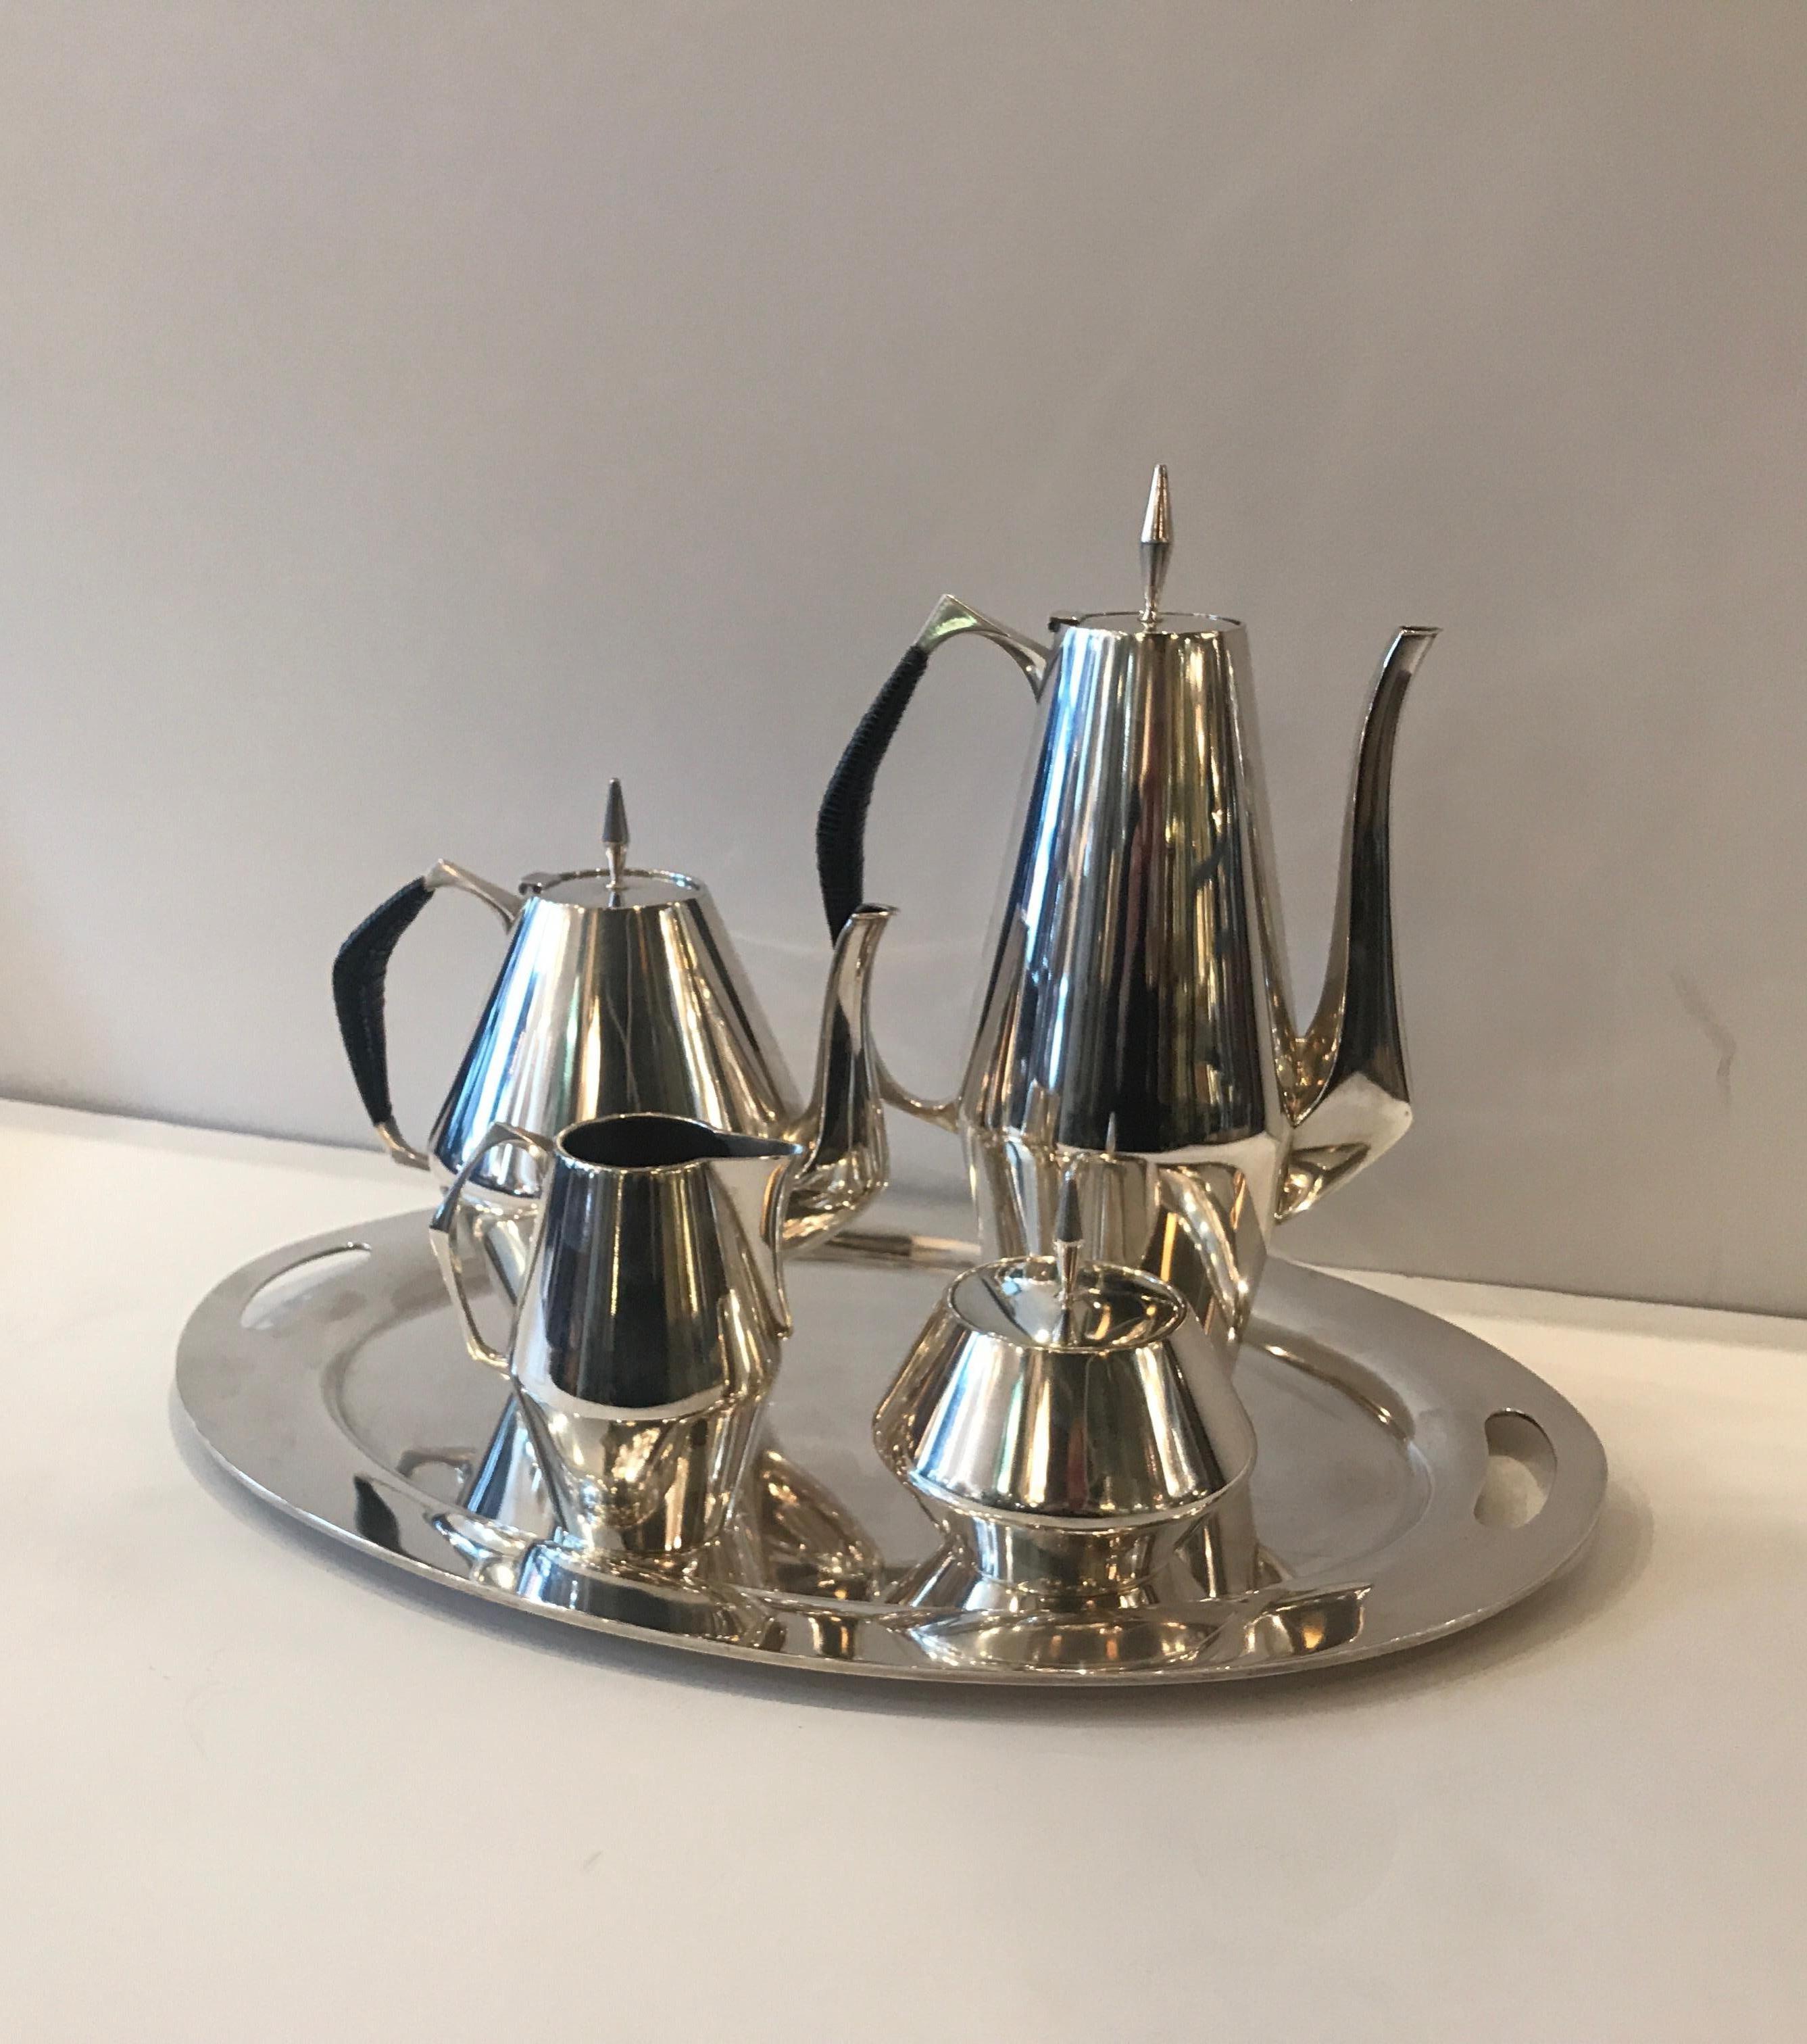 A sterling tea service with sterling tray designed by Gio Ponti for Reed and Barton, pattern 440 